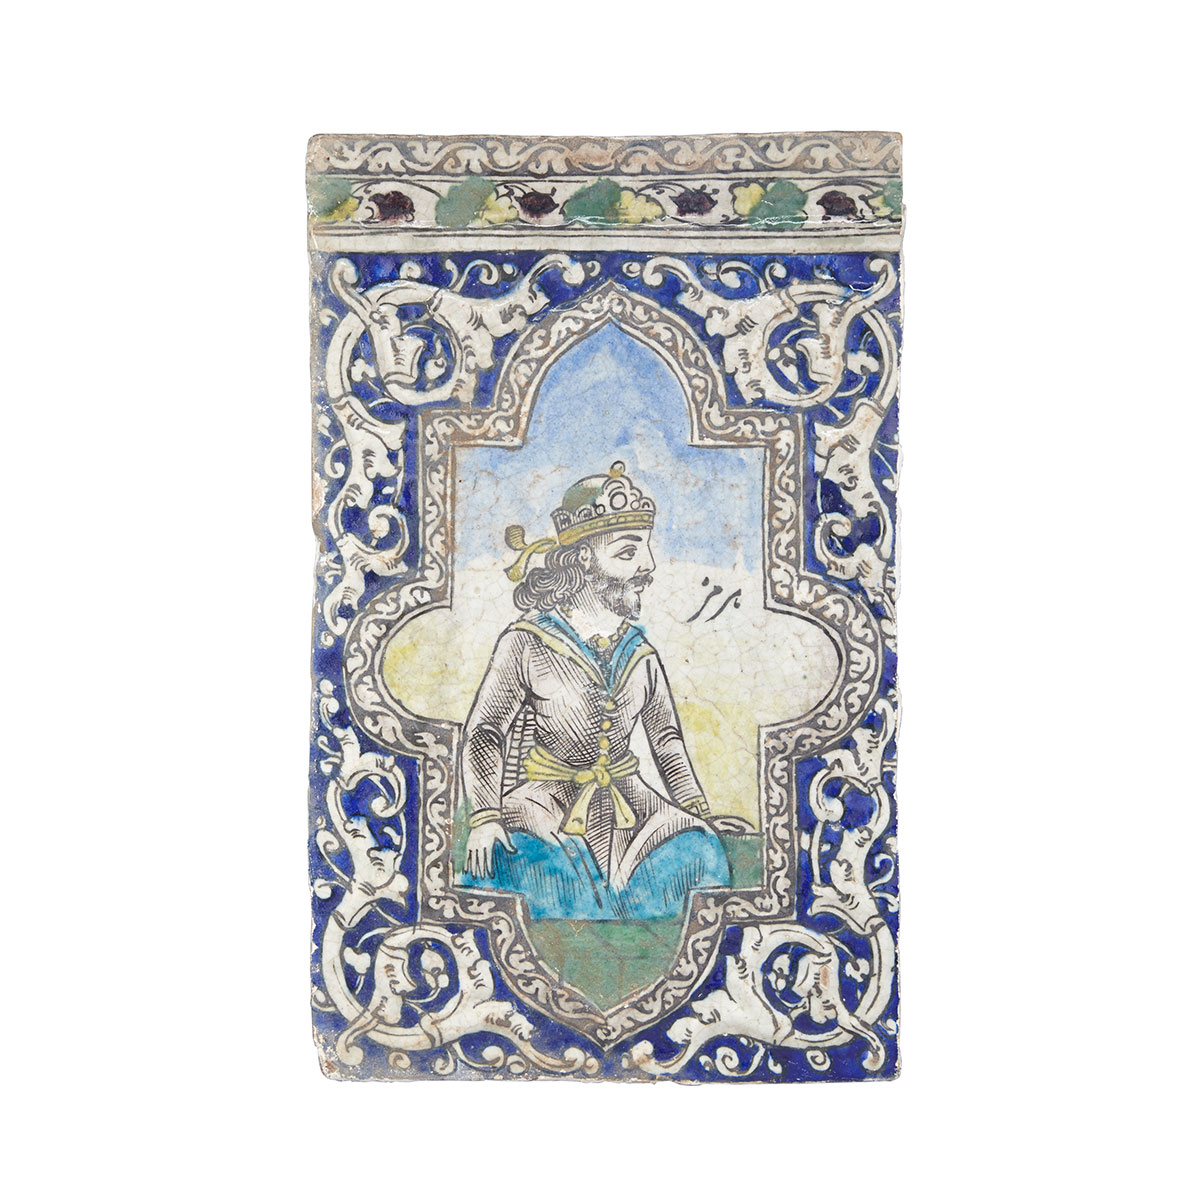 Large Polychromed Pottery Wall Tile, Persia/Qajar, Late 19th Century